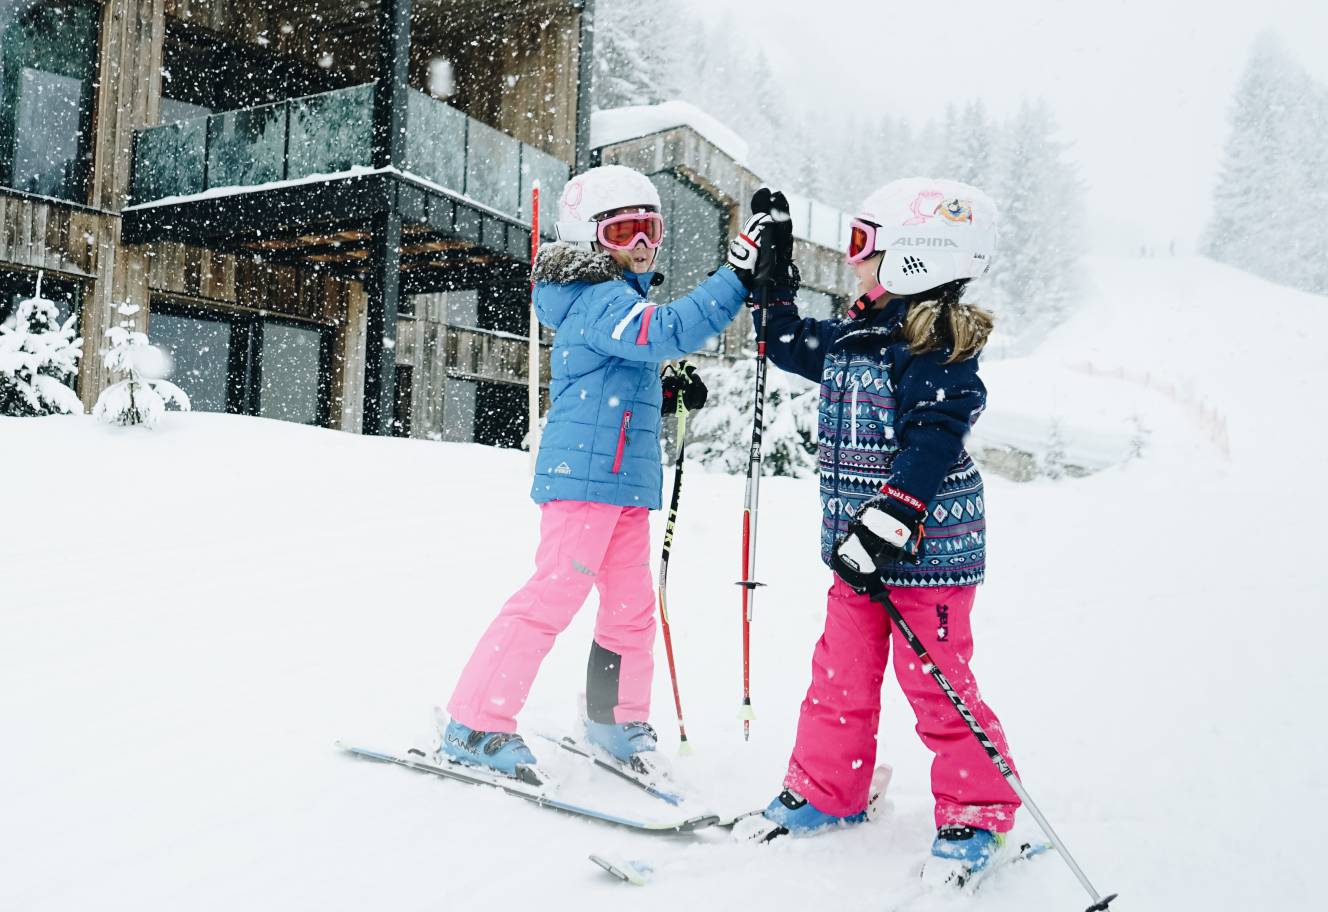 Children on skis give each other high fives